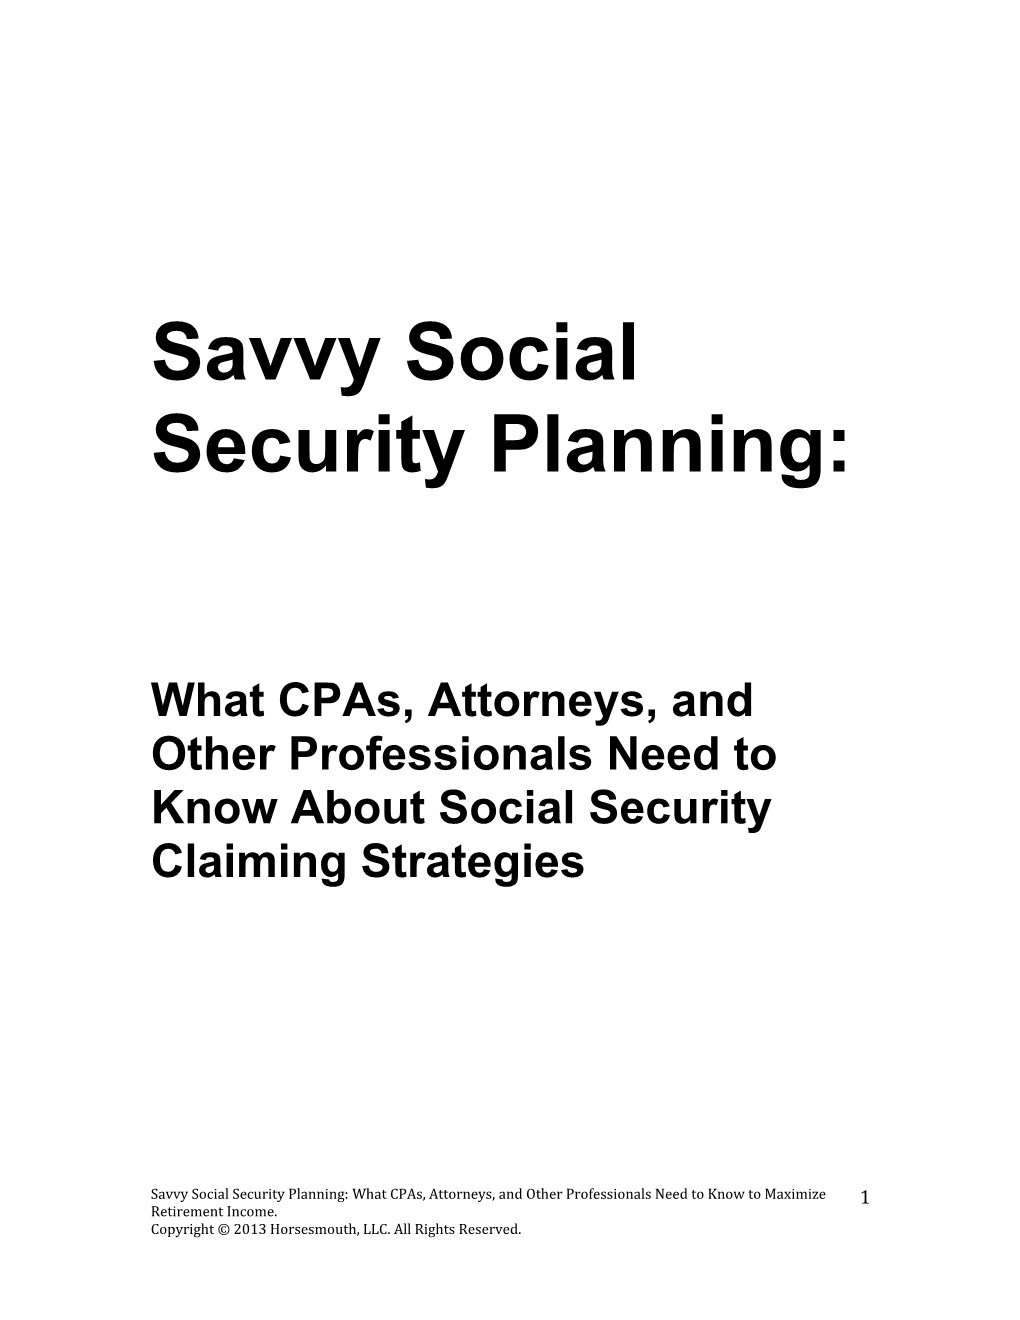 What Cpas, Attorneys, and Other Professionals Need to Know About Social Security Claiming